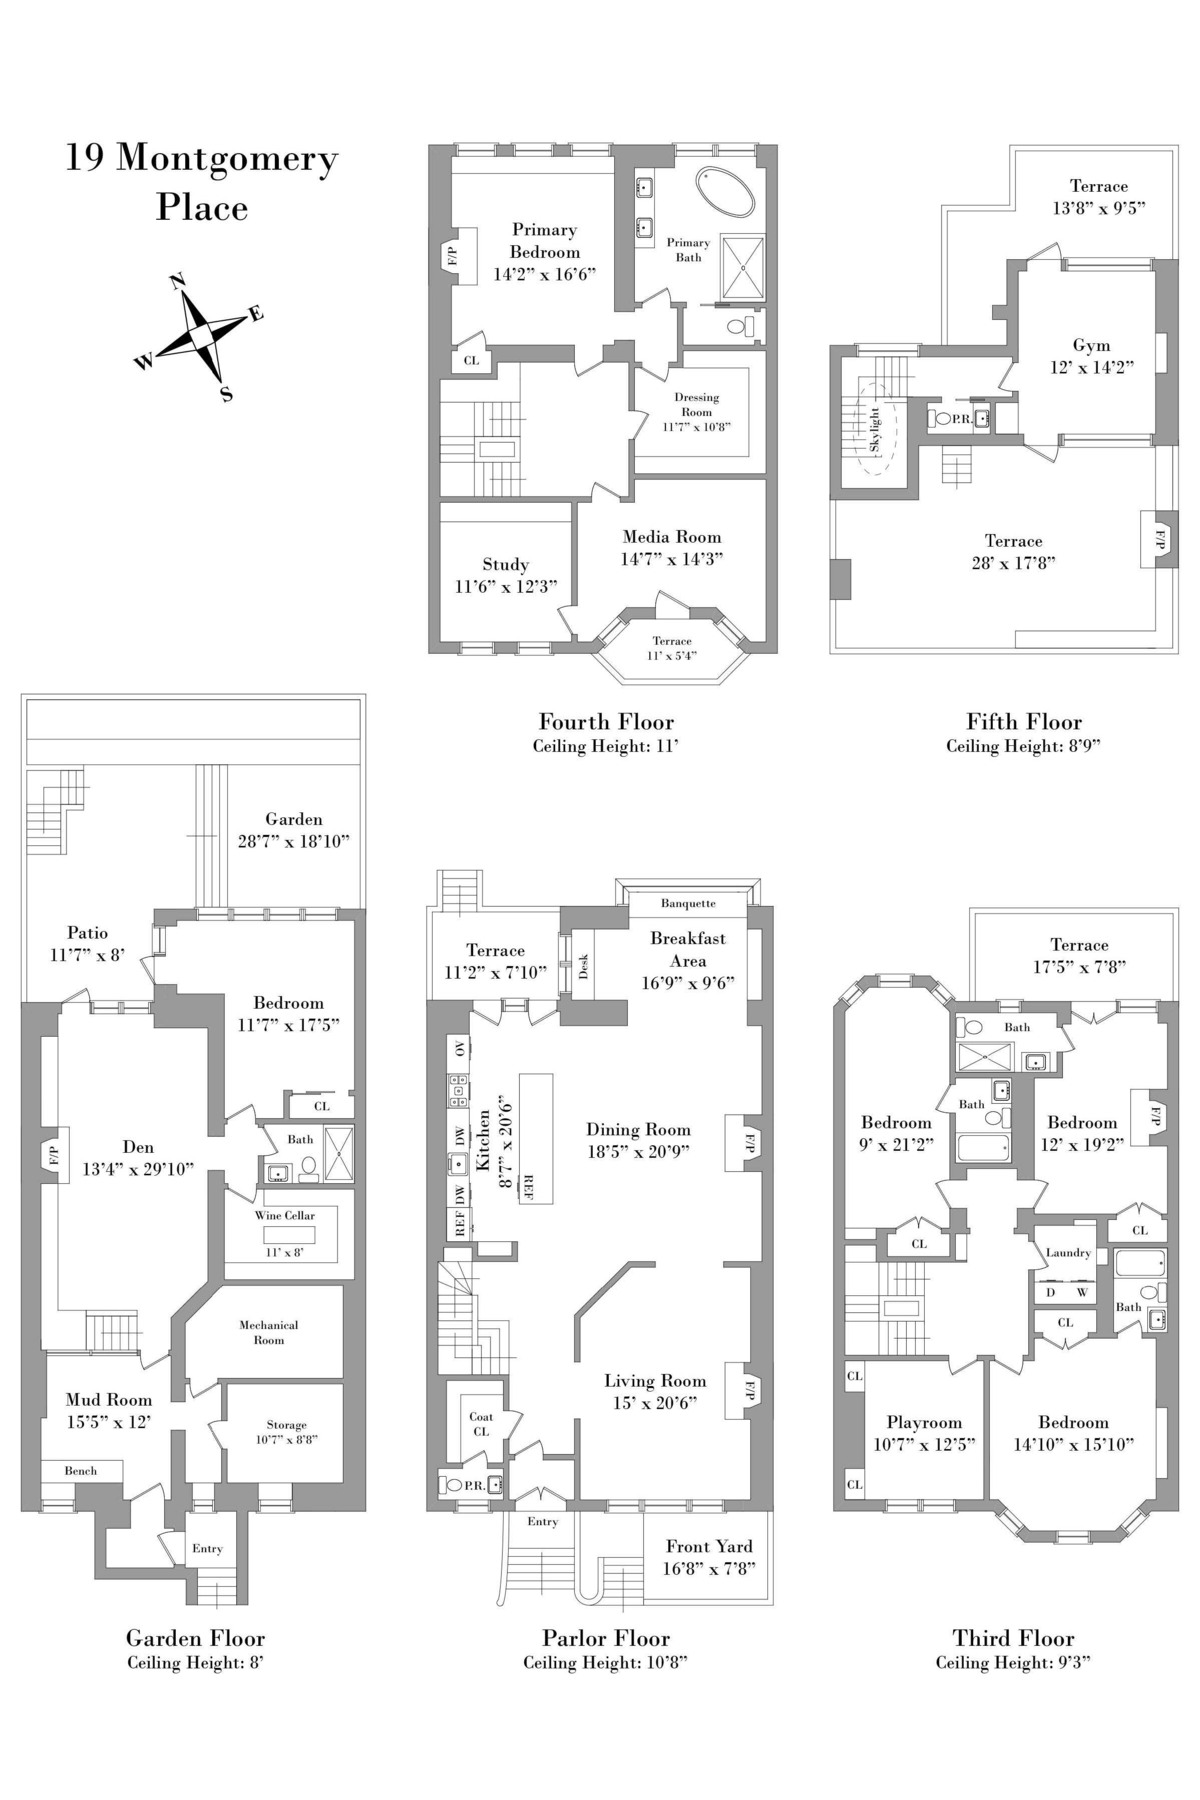 floorplan showing five floors of living space with terraces and gym on the top floor